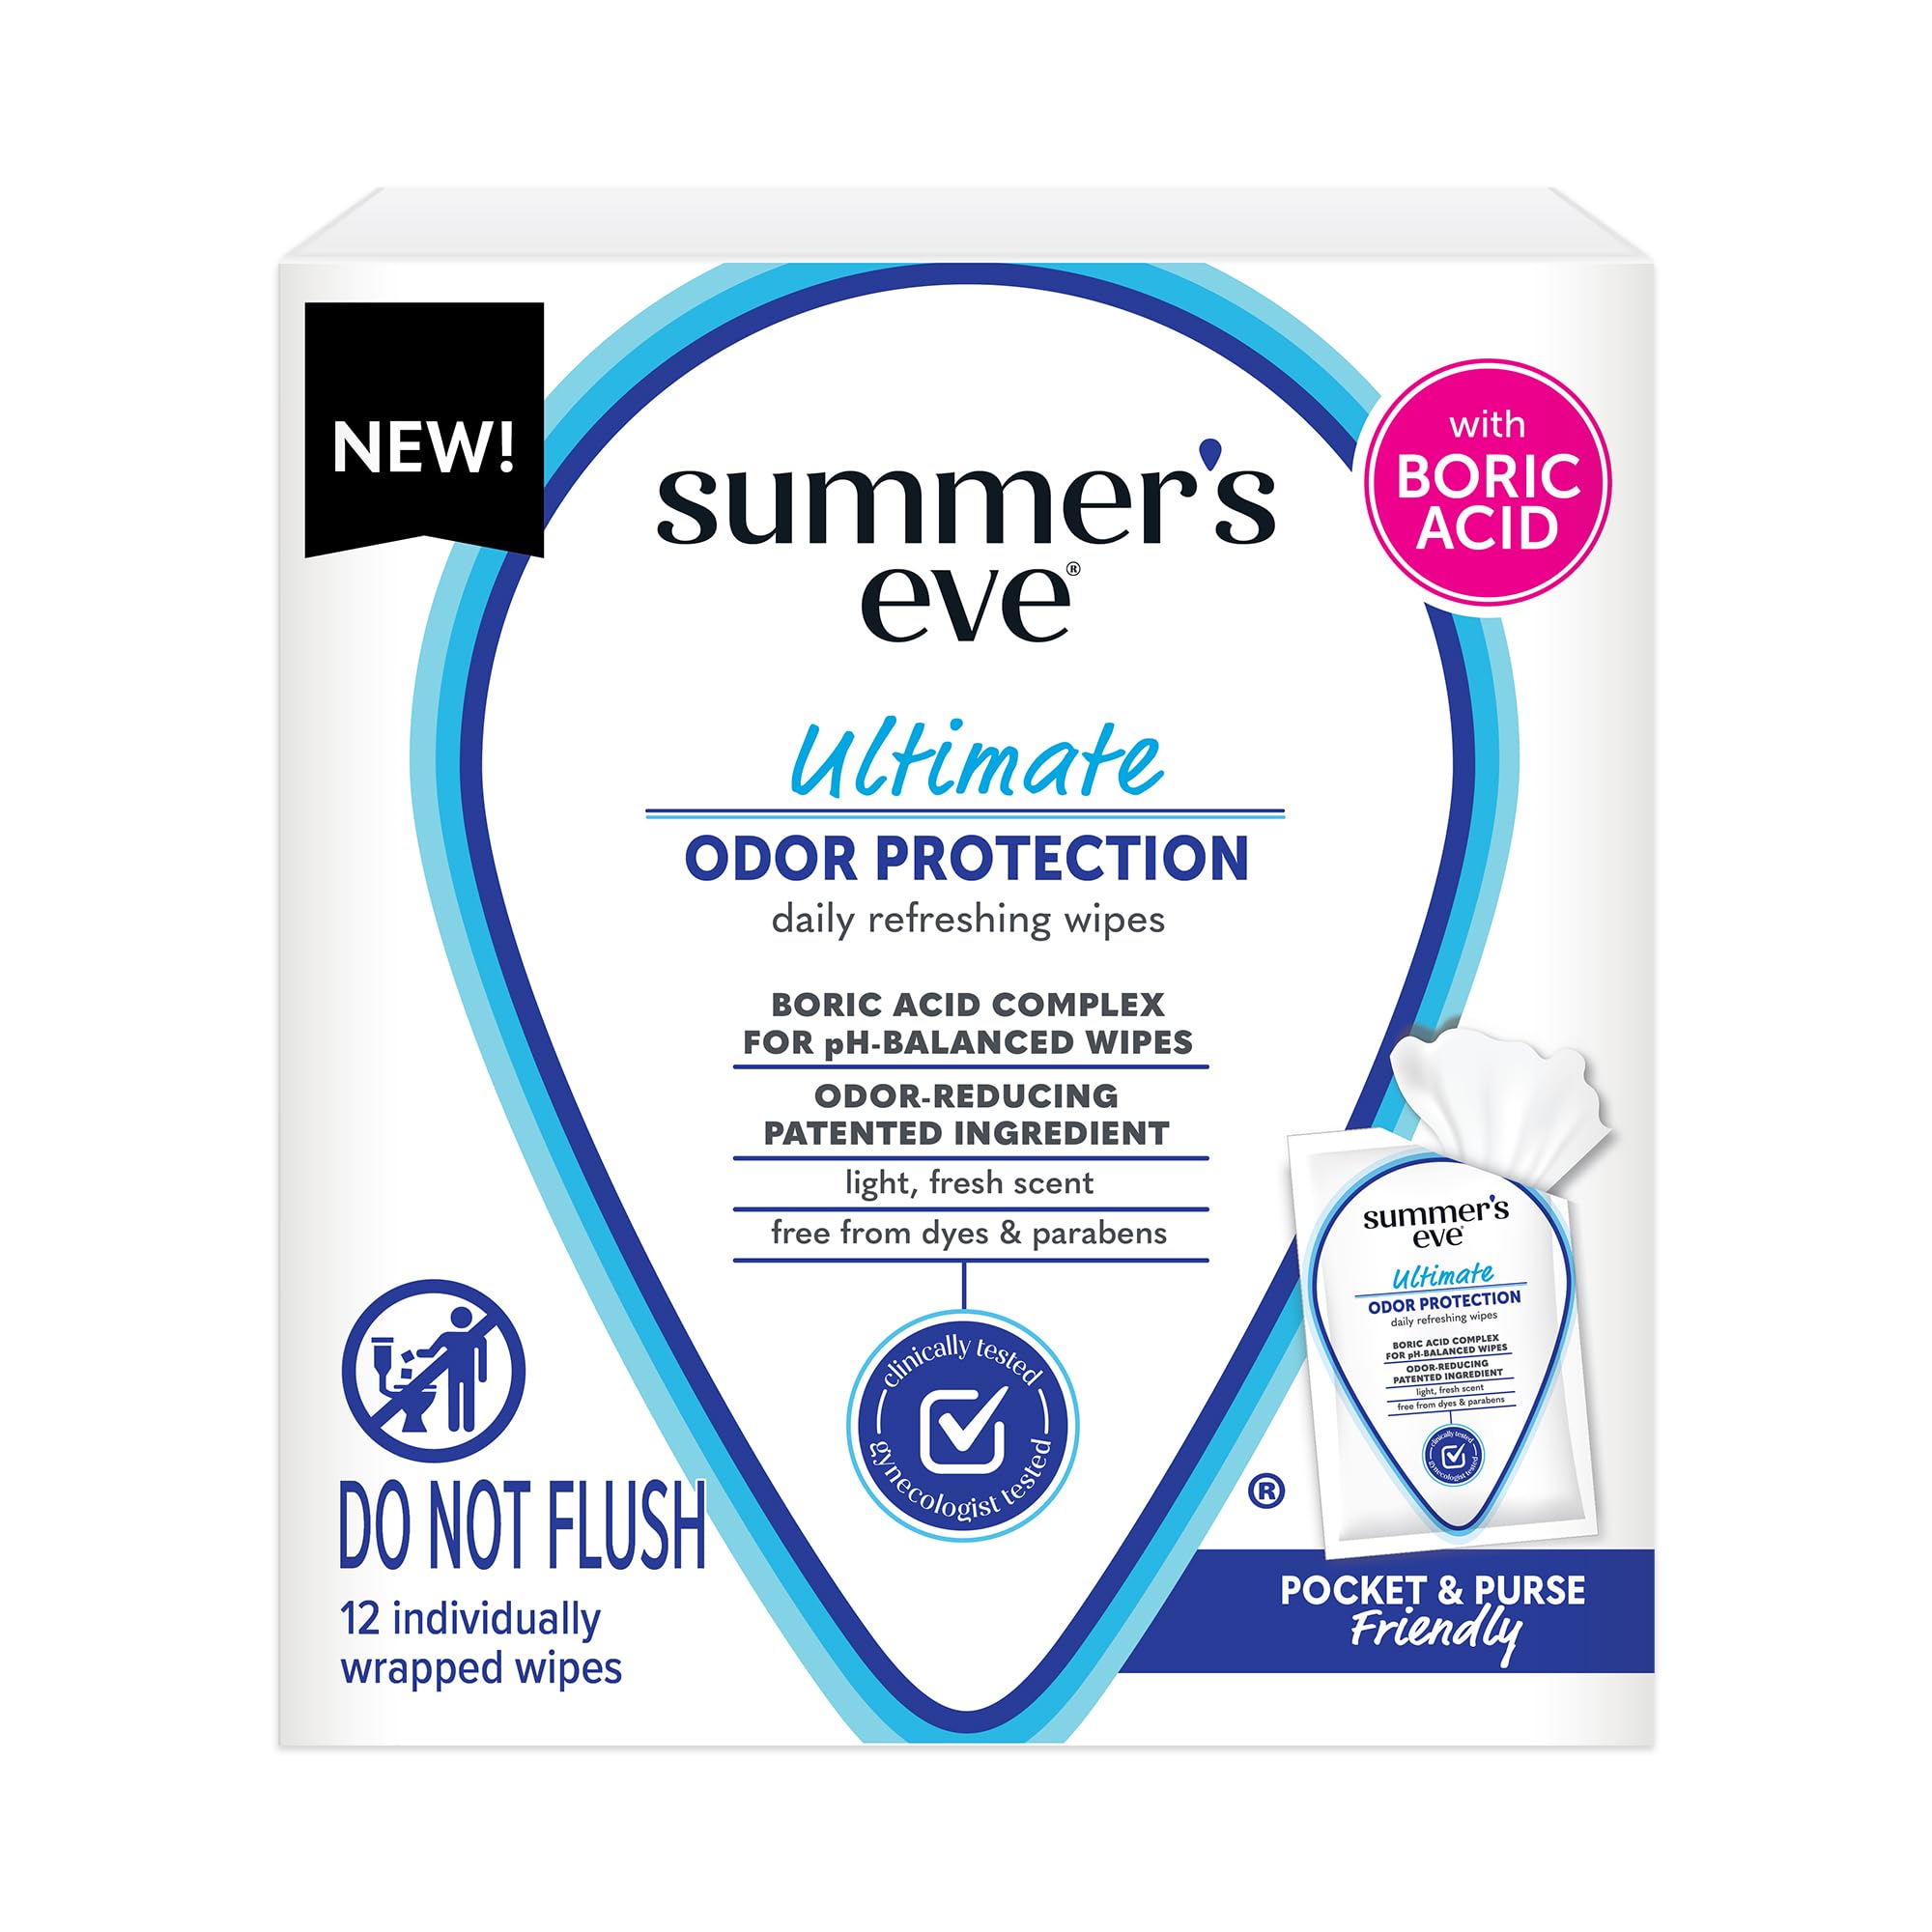 Summer’s Eve Ultimate Odor Protection Feminine Wipes, Boric Acid Complex for pH-balance 12 Count